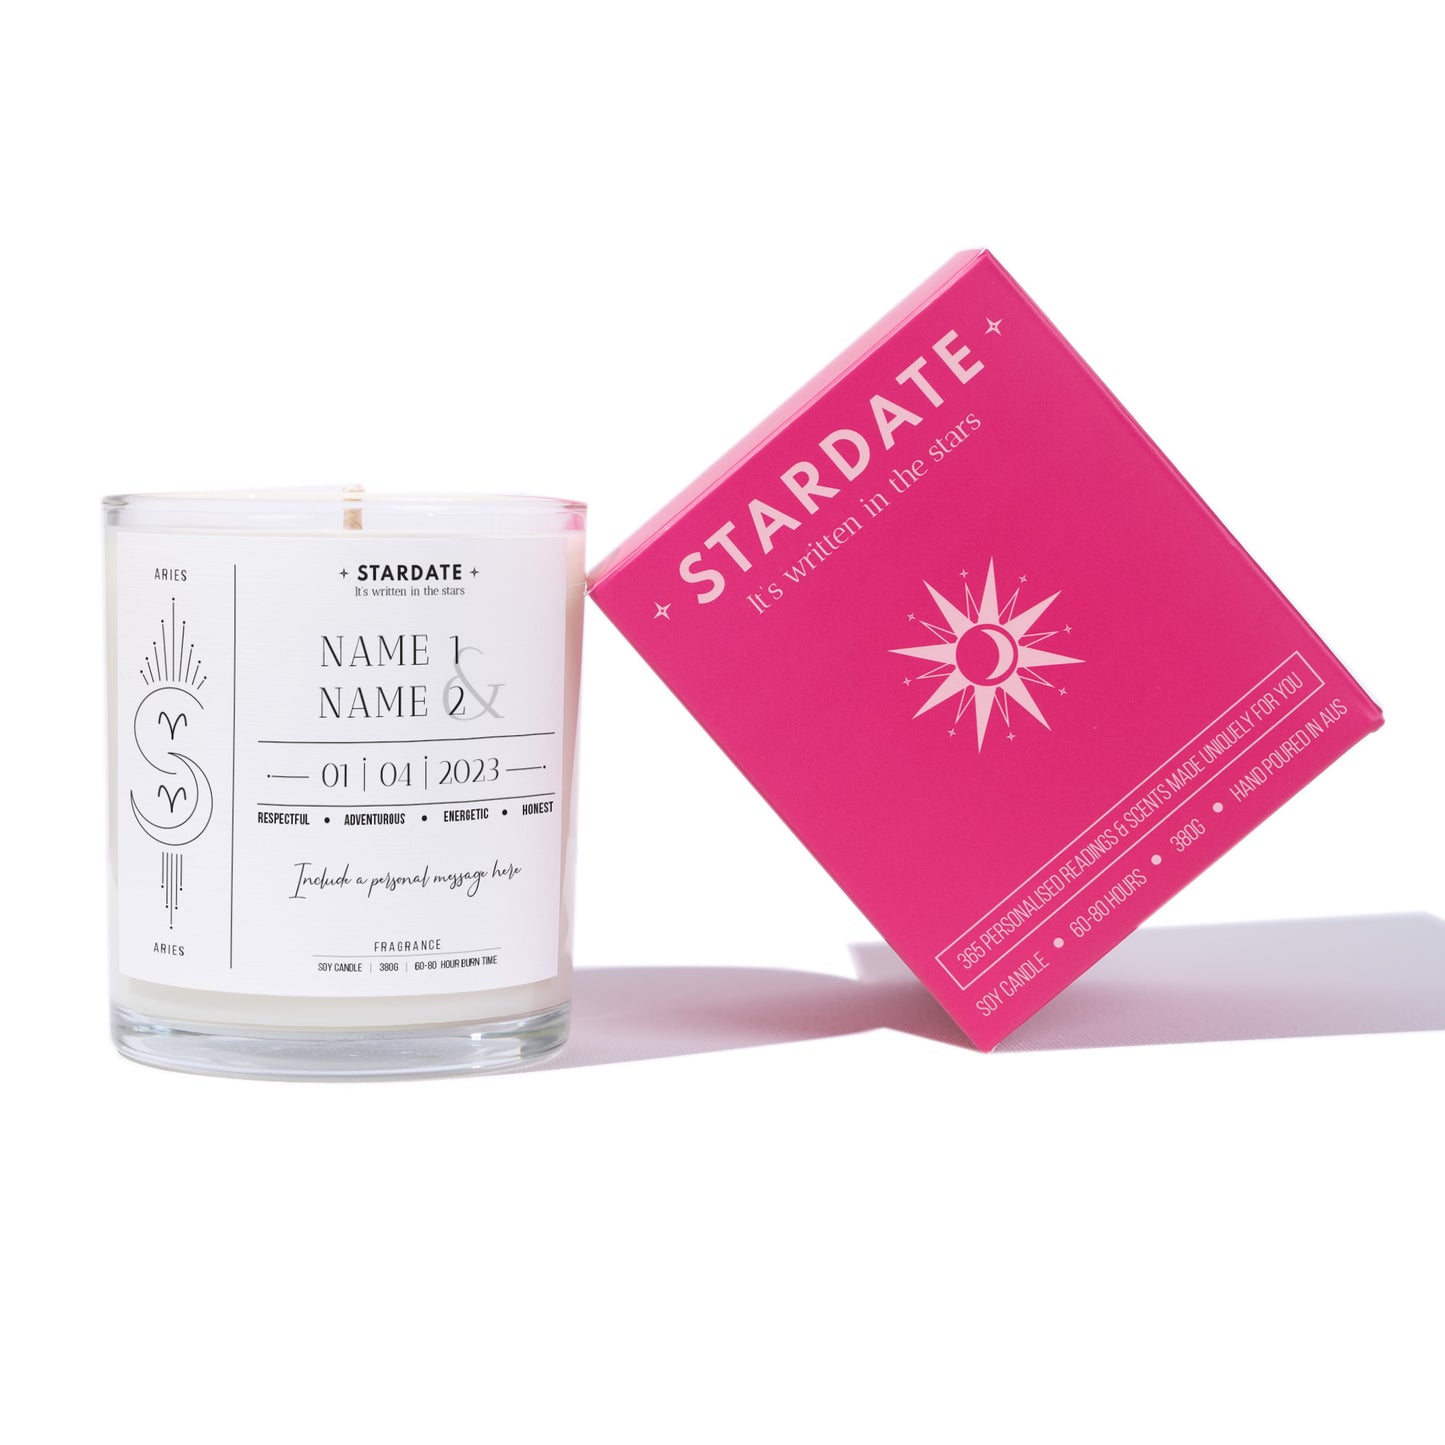 Aquarius and Pisces Compatibility Candle